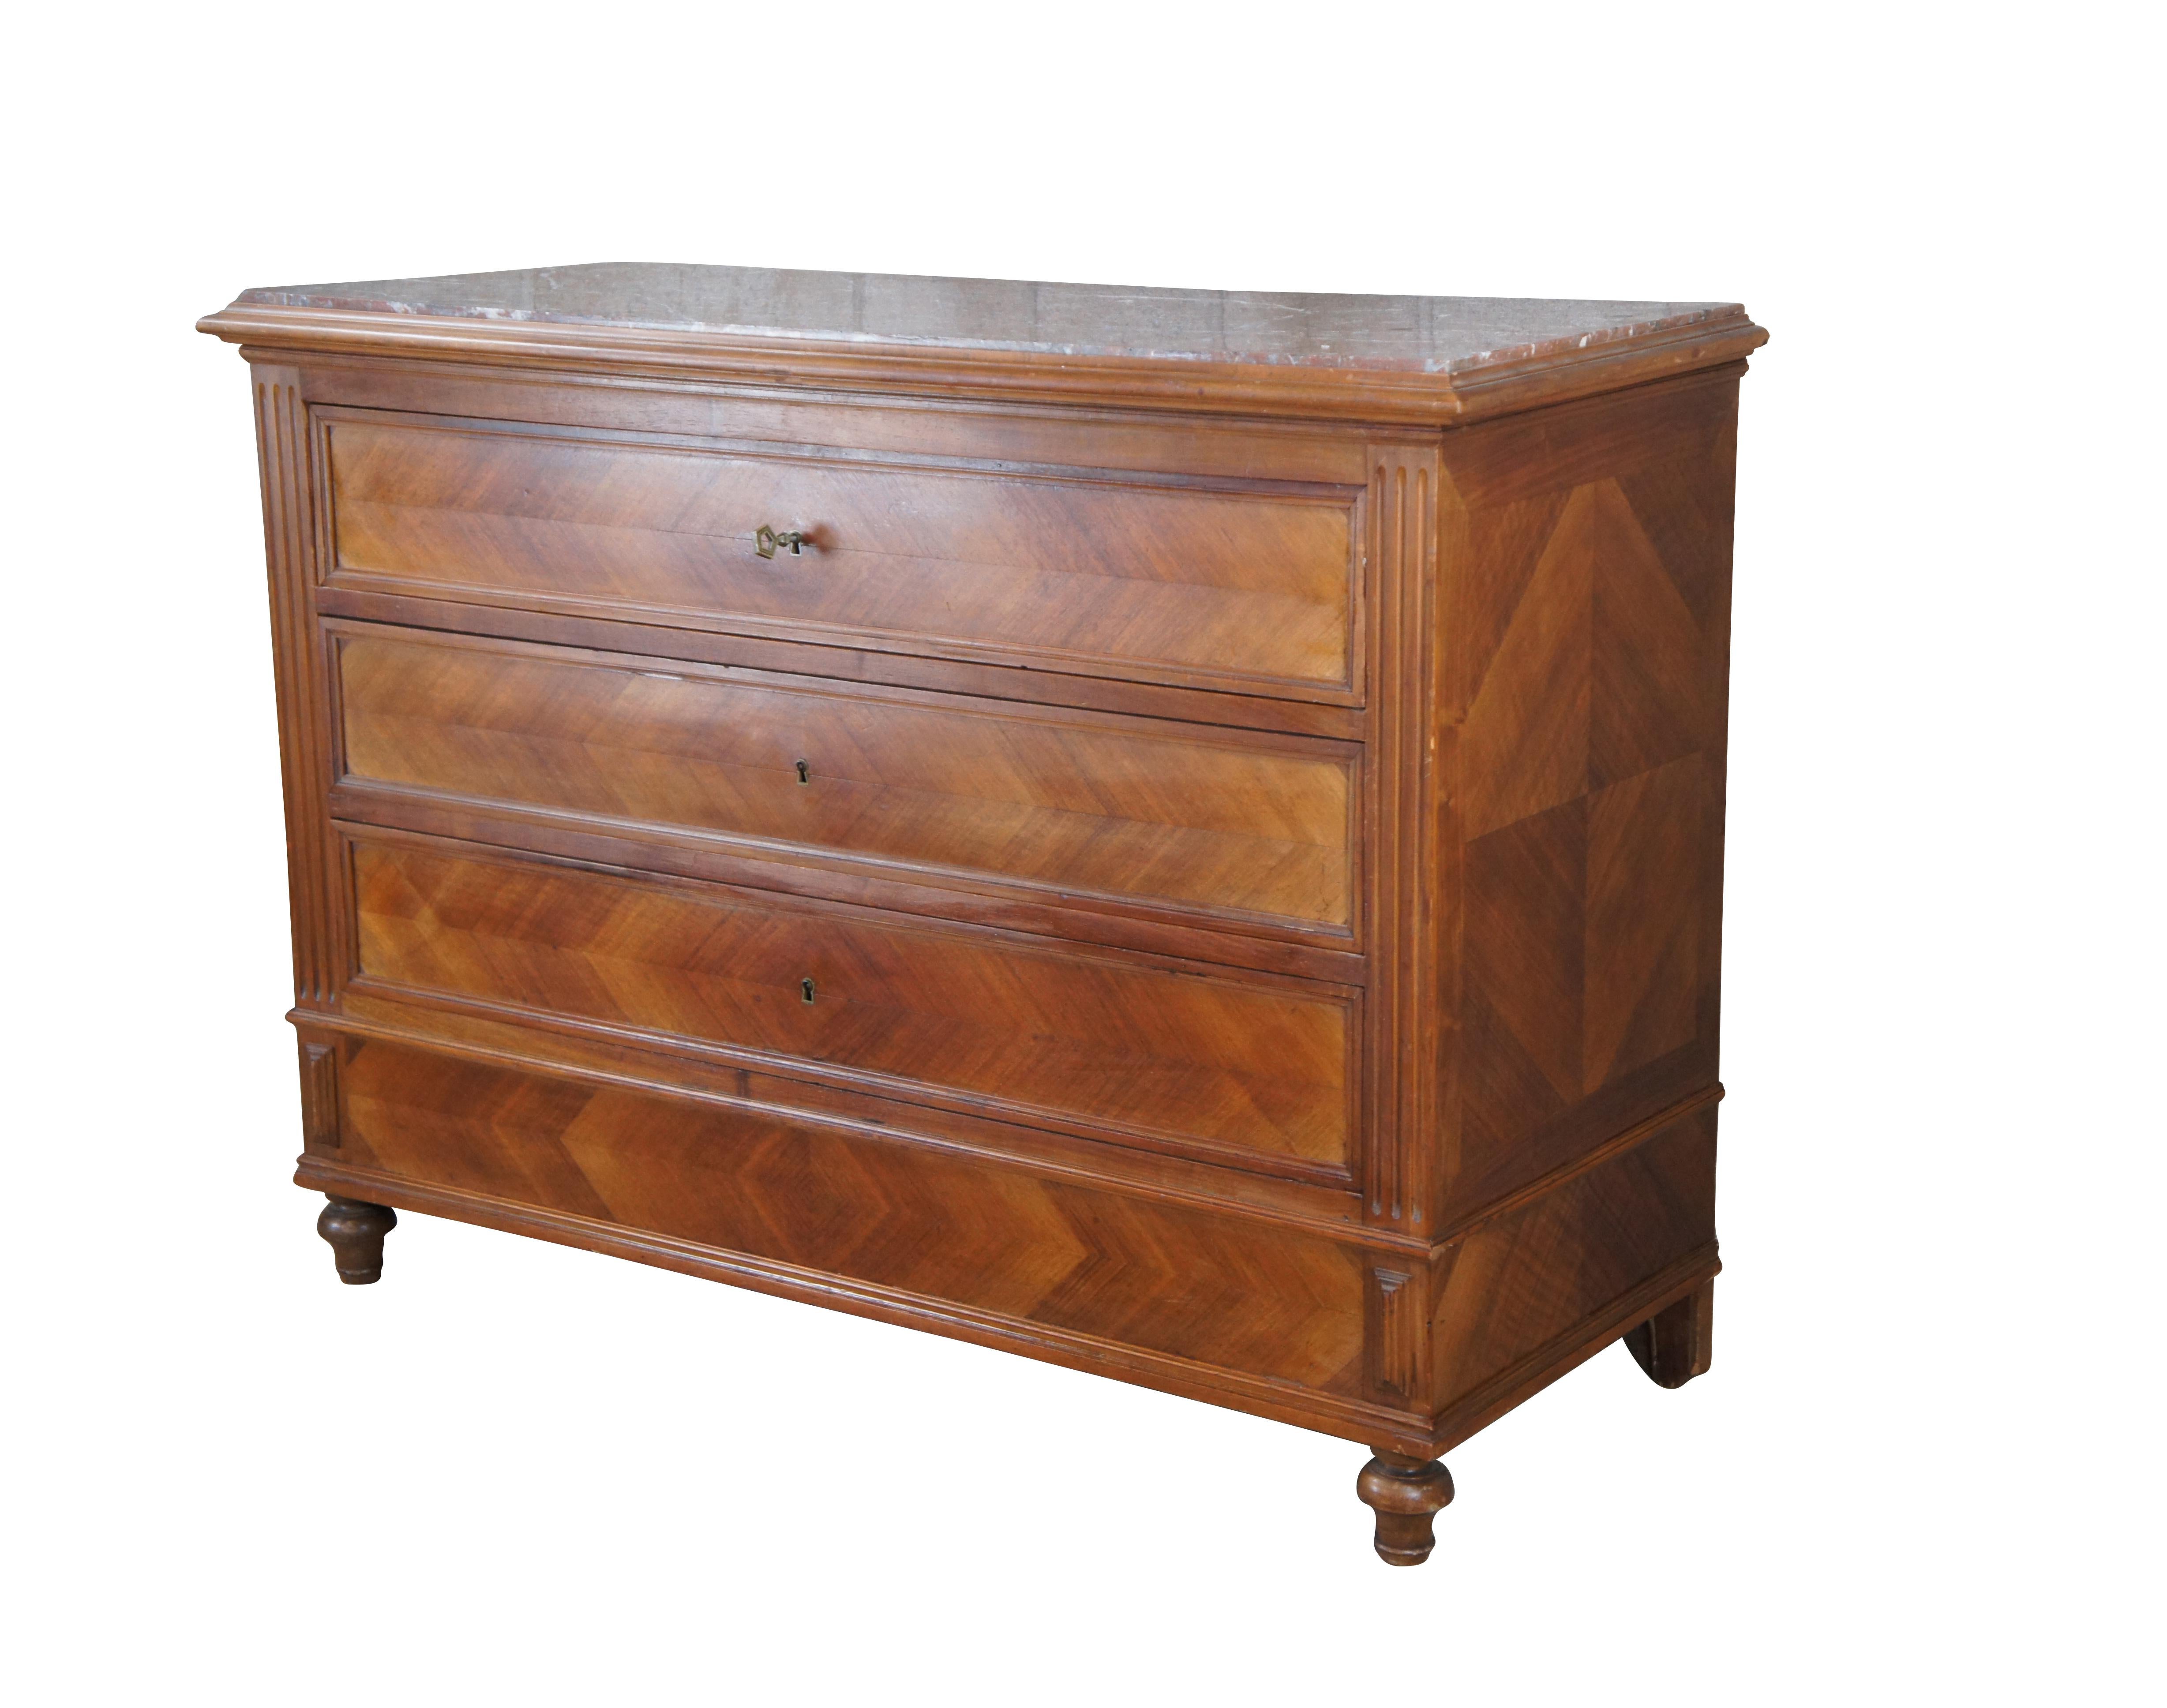 Antique 19th C. French Louis Philippe Matchbook Walnut Commode Chest of Drawers In Good Condition For Sale In Dayton, OH